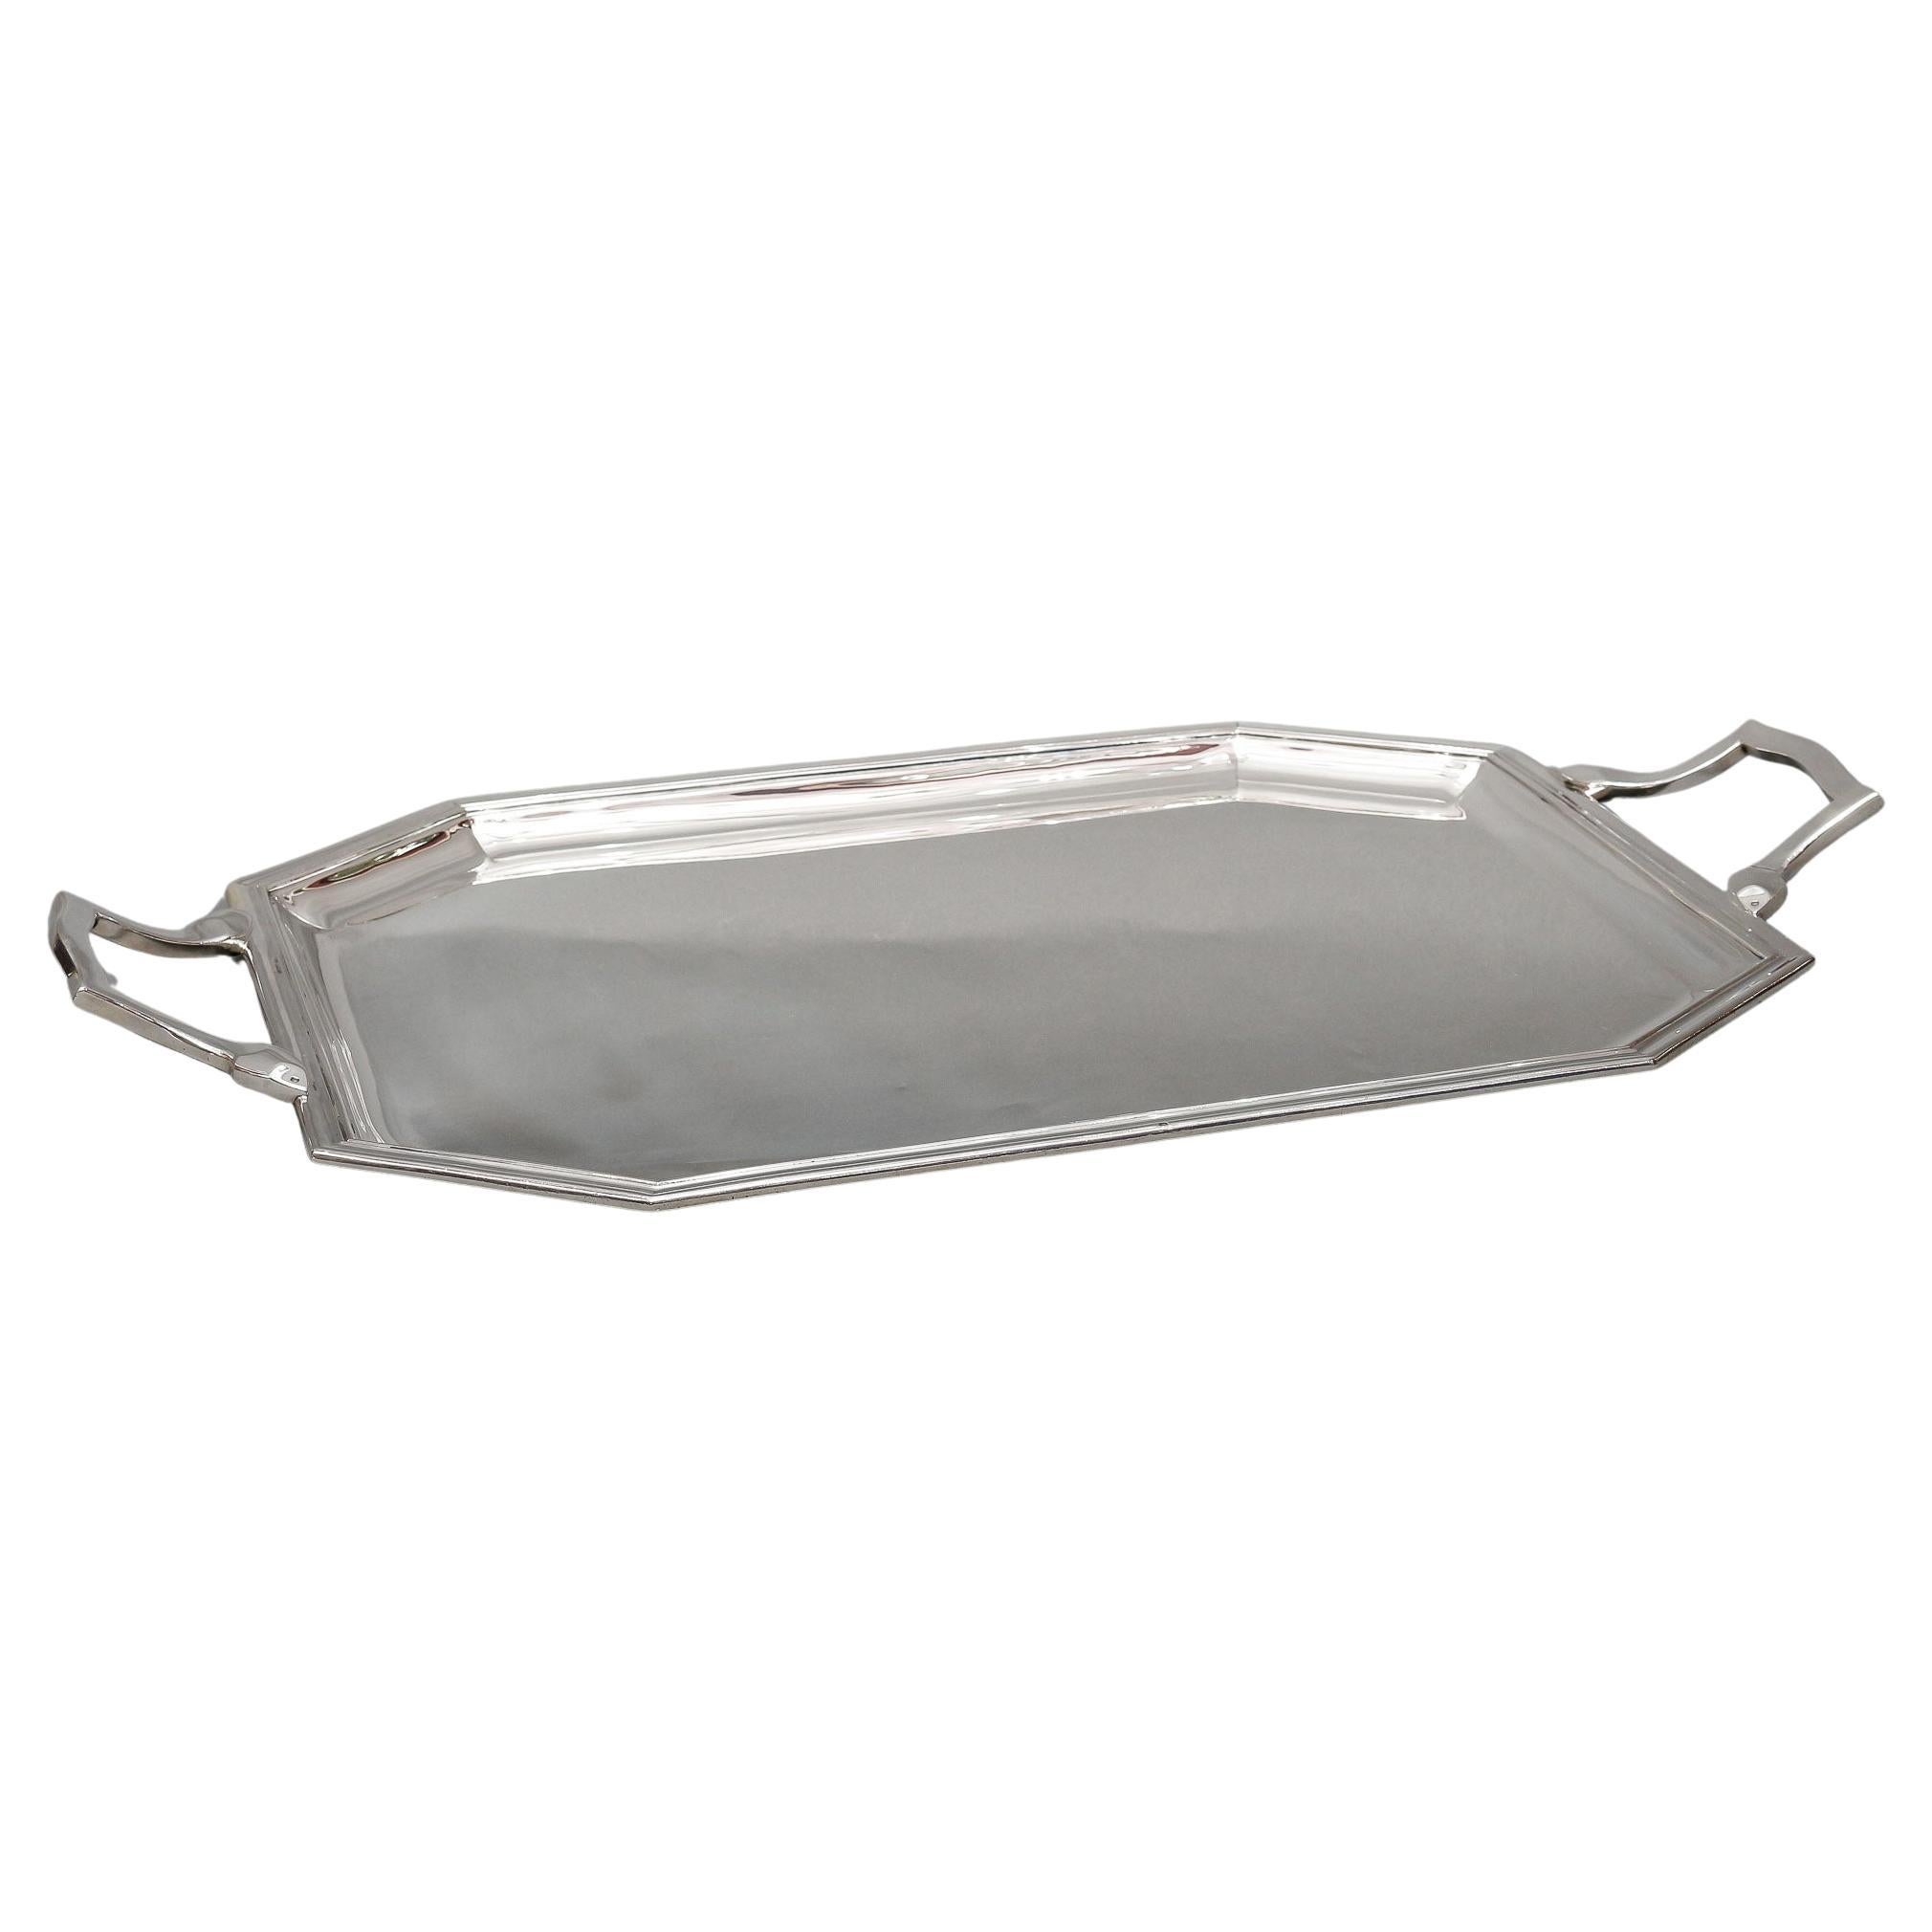 Solid silver octagonal tray with wide threaded border, lowered with a hammer and flanked by two slightly raised handles.

Dimensions: length 63.5 cm – width 39 cm – height 6 cm

Material: 1st grade silver 950/°°

Weight: 2970 grams

Hallmark: